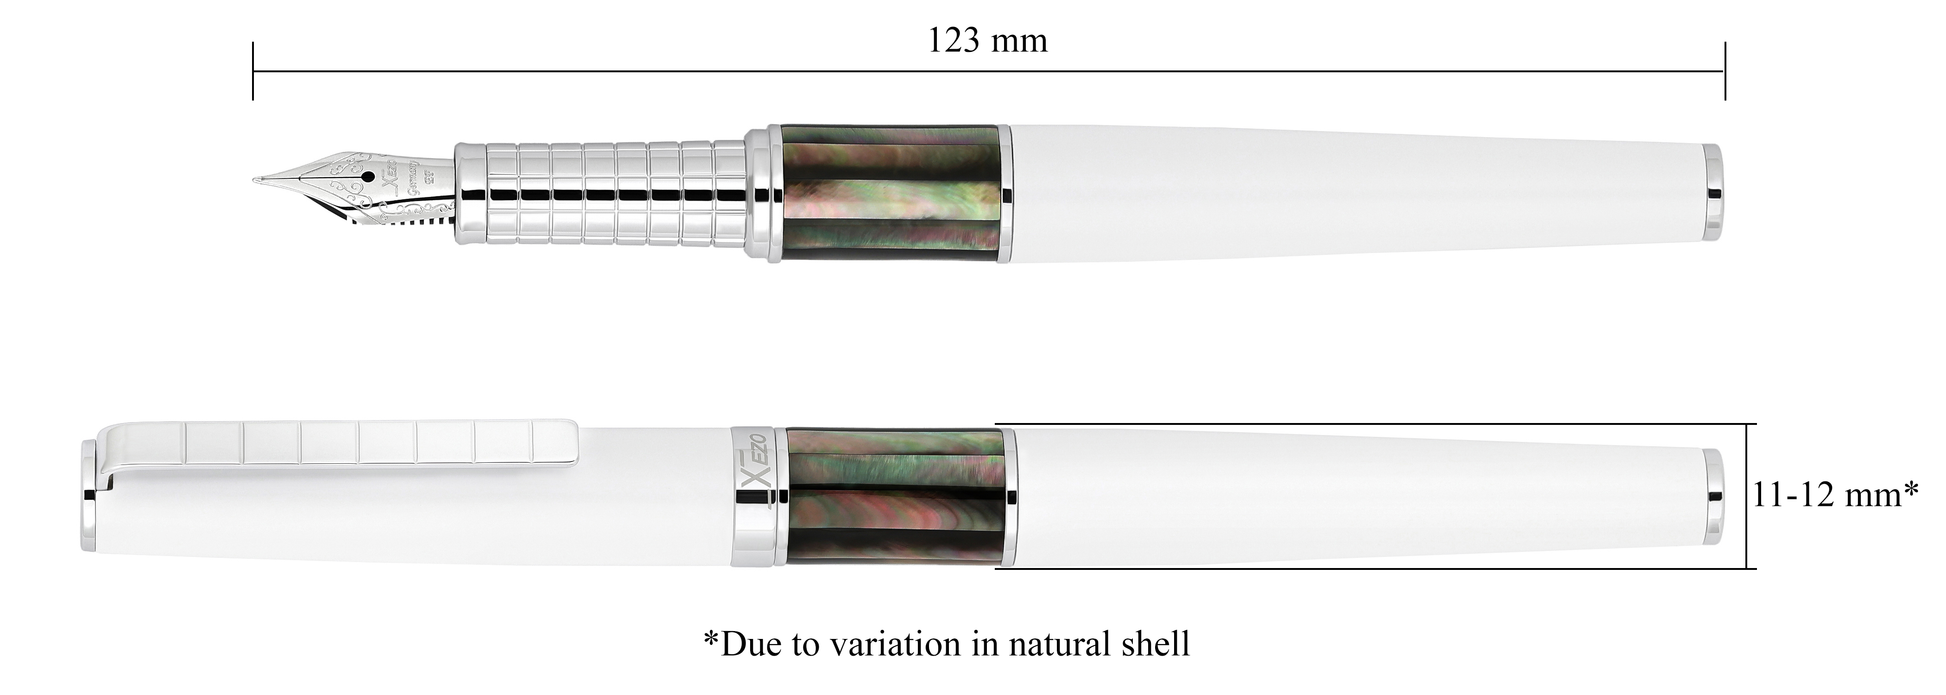 Xezo - Vertical view of two Speed Master White EF-BC Fountain pens; the one on the left is capped, and the one on the right is uncapped; Length is labeled 123 mm, width is labeled 11-12mm (Due to variation in natural shell)